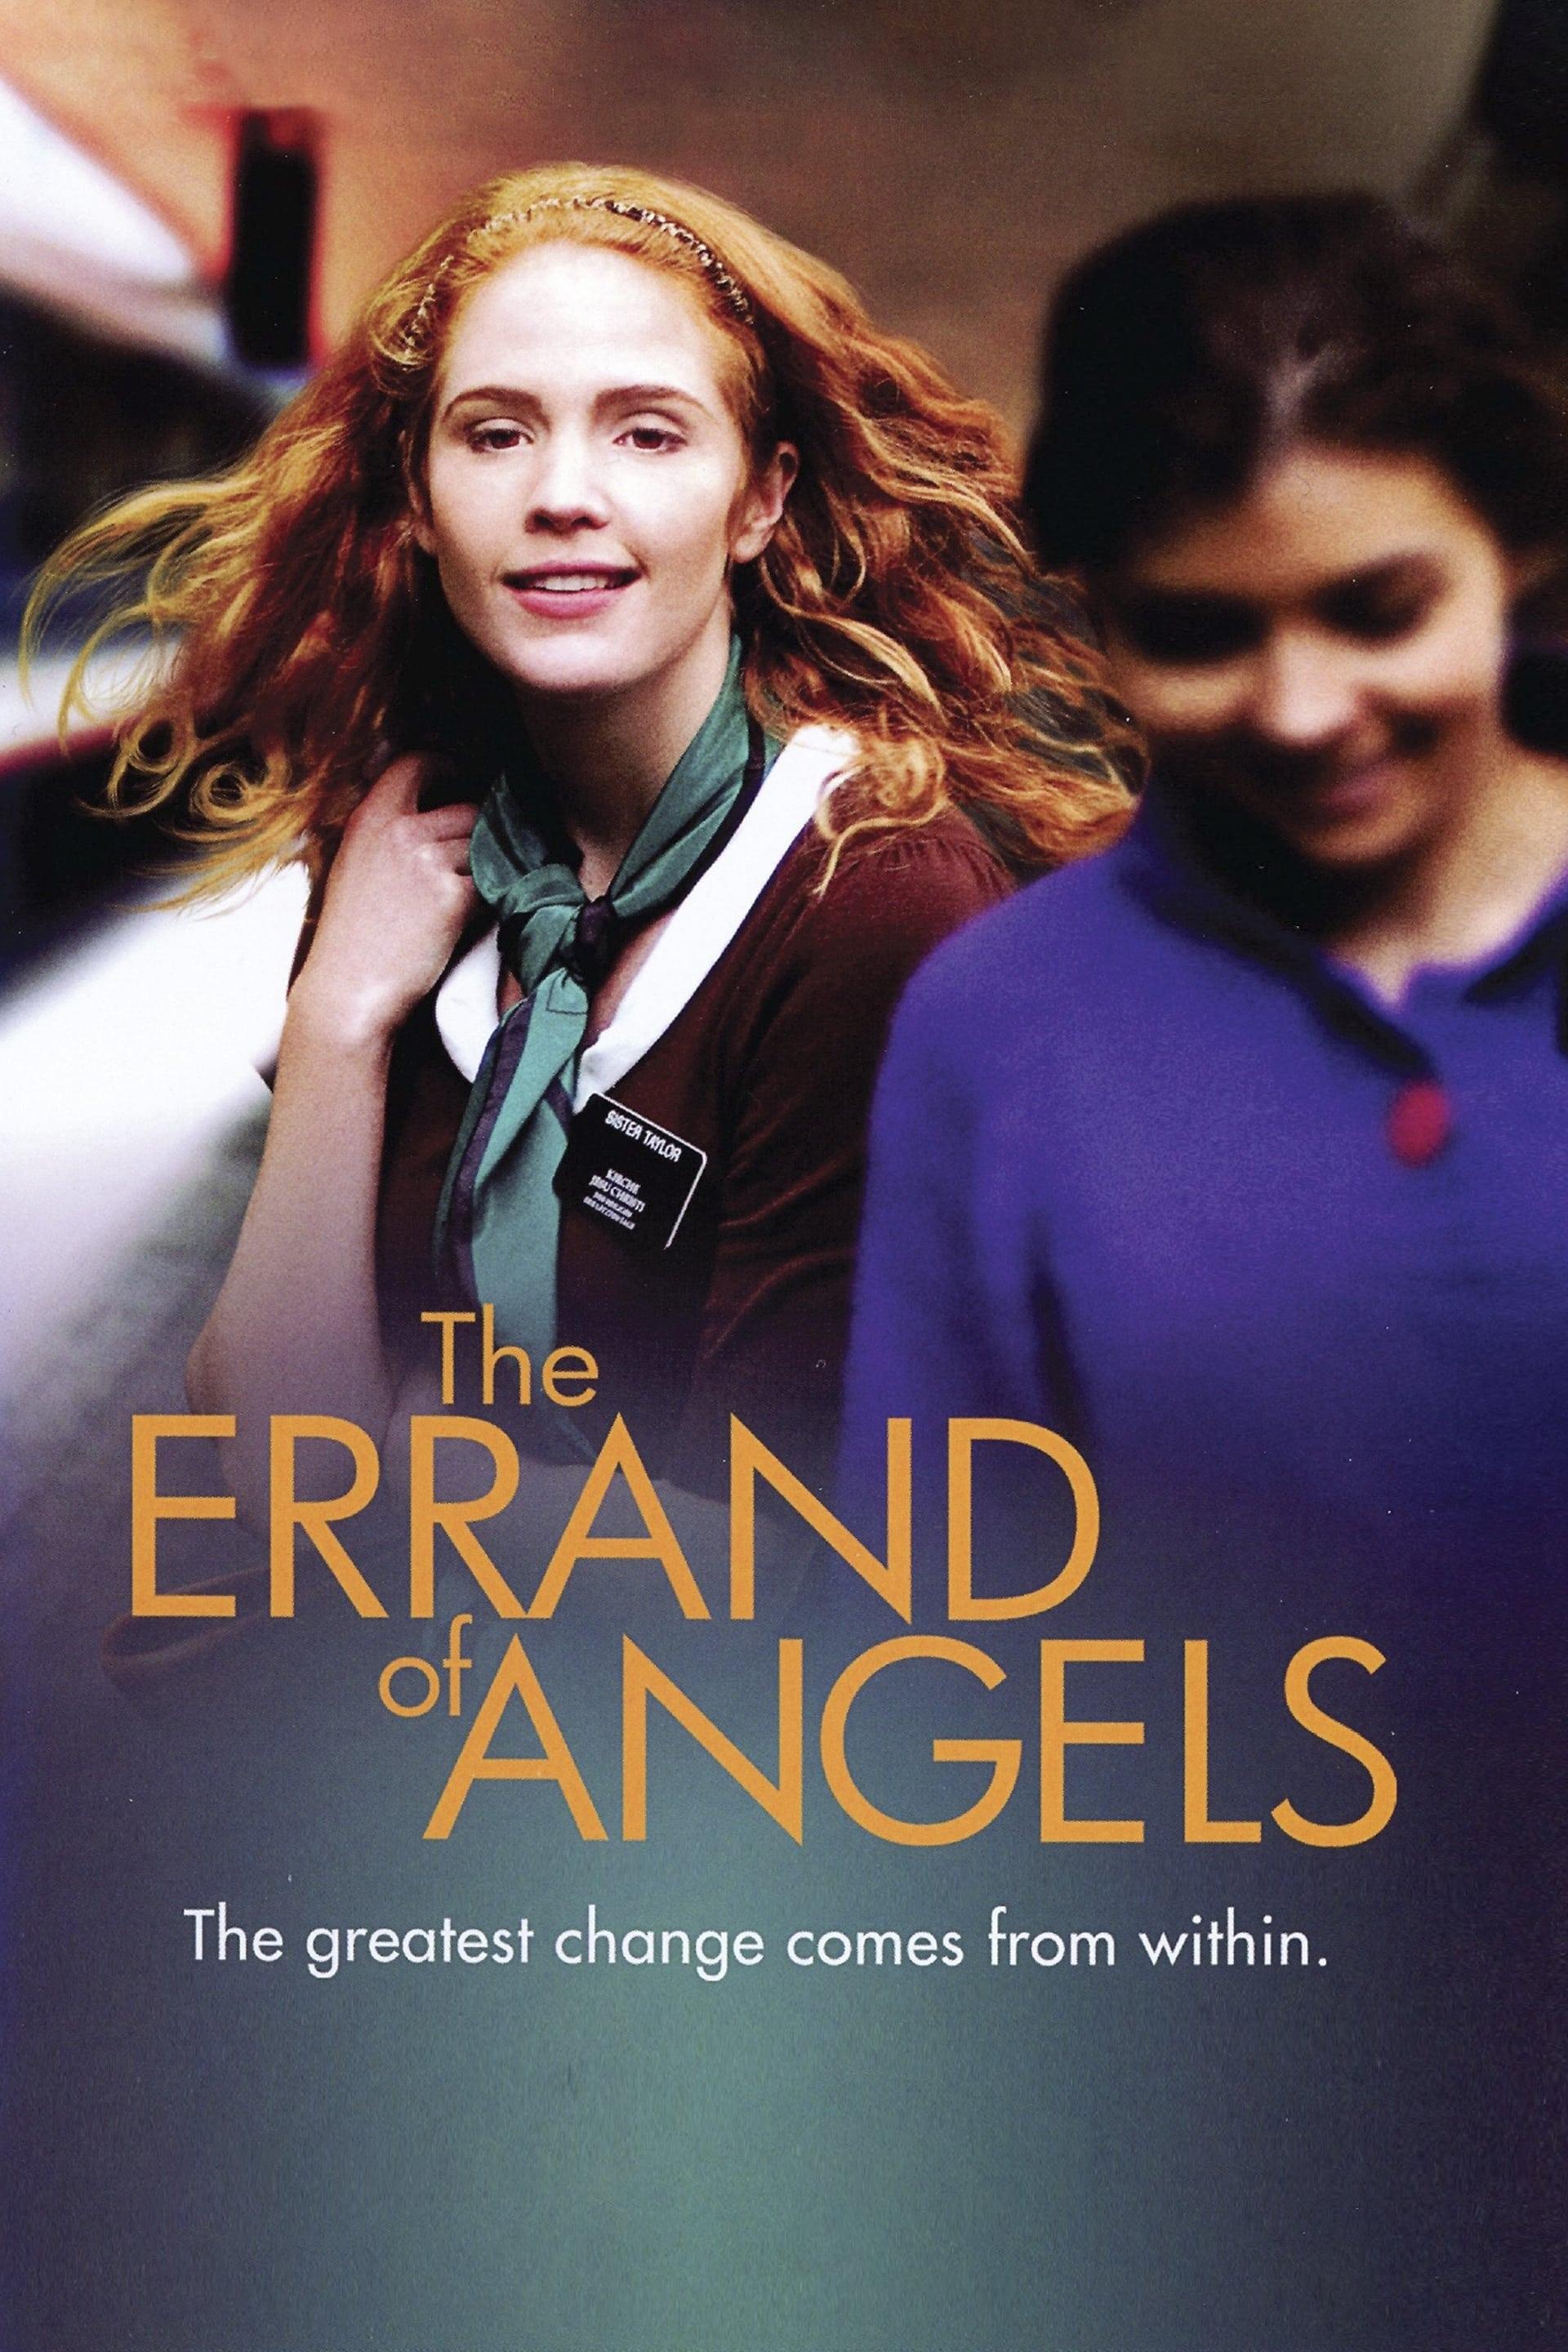 The Errand of Angels poster